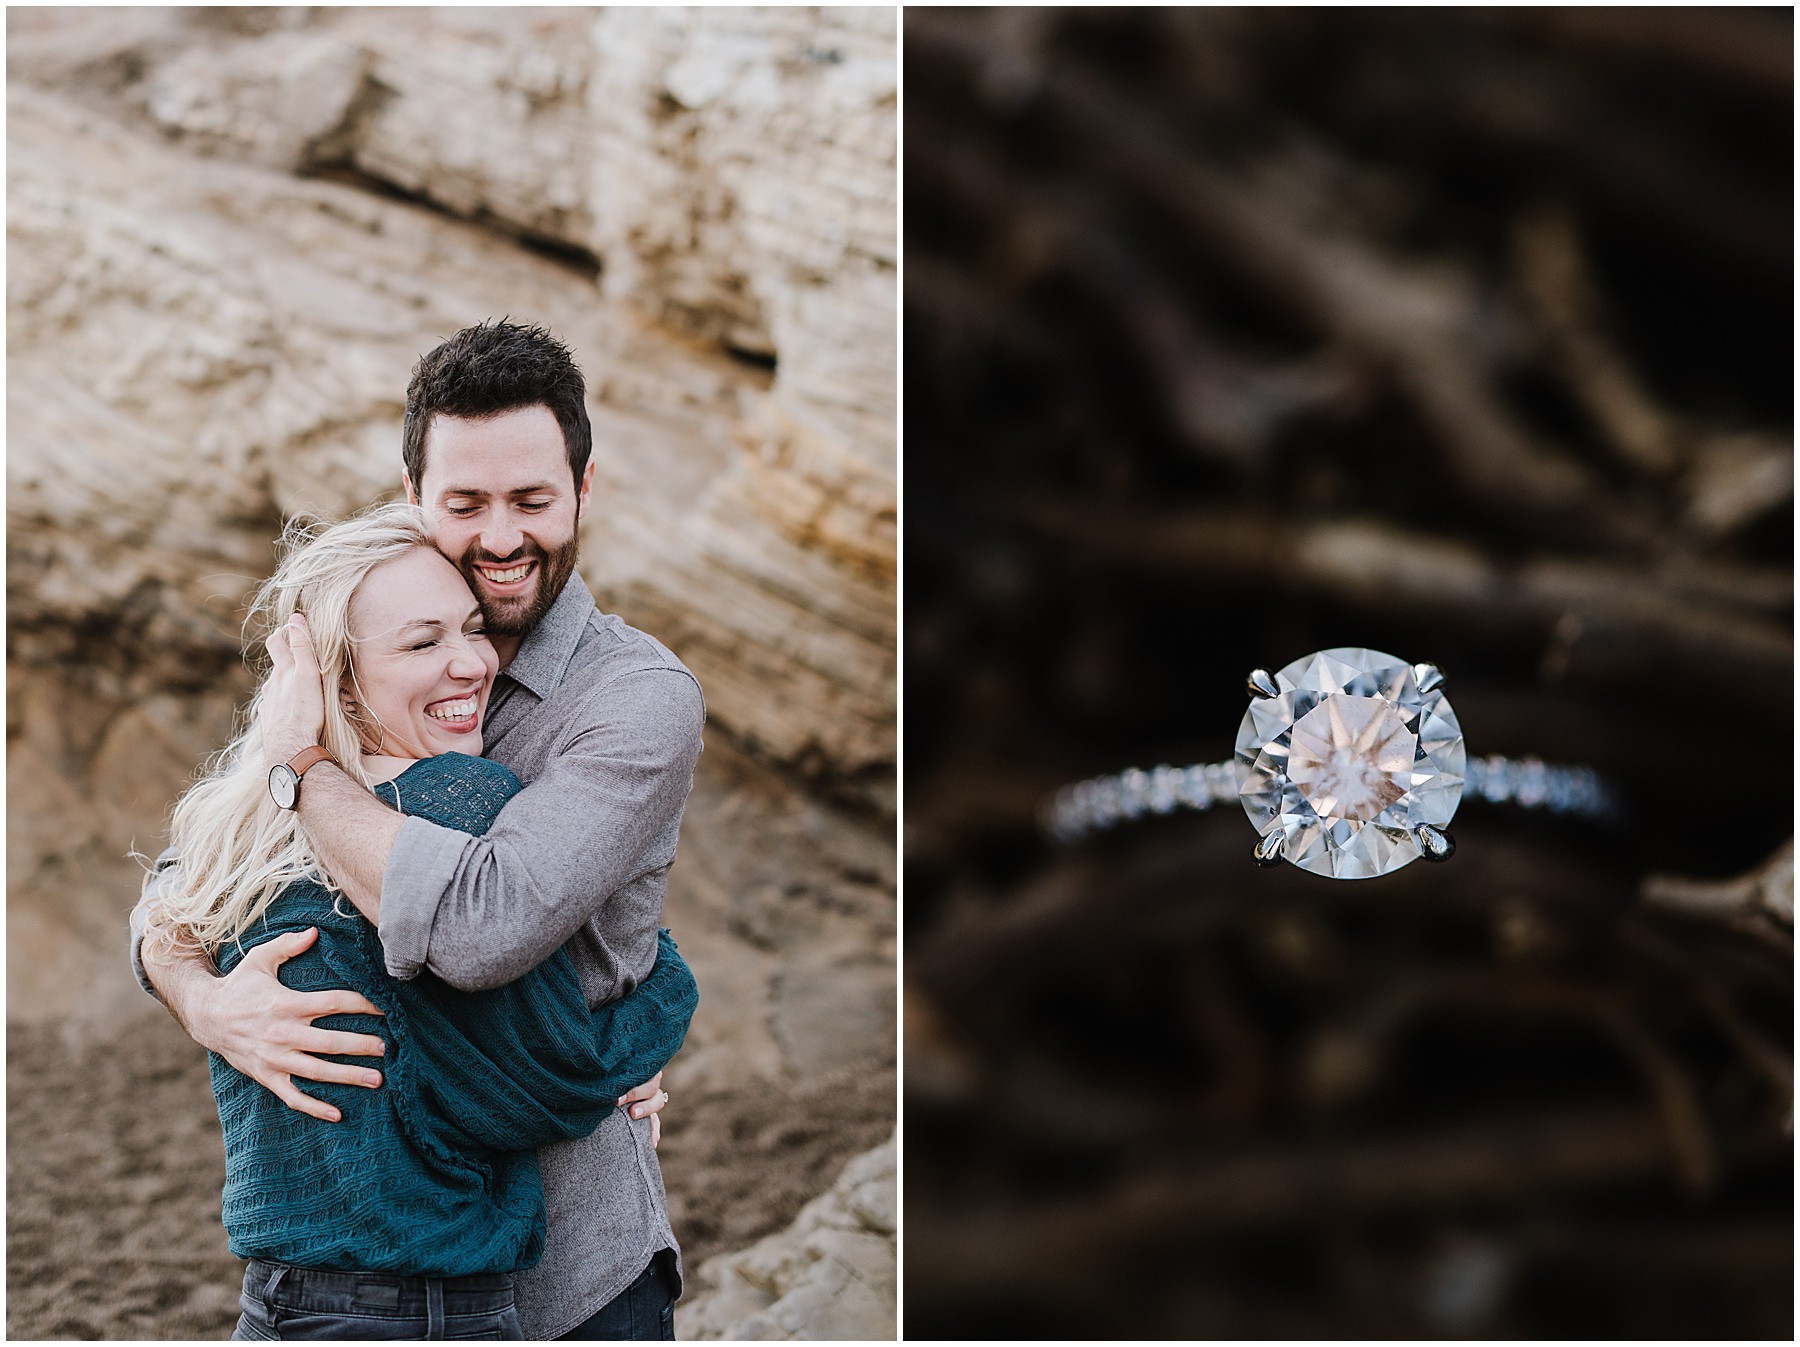 Montana De Oro Chilly Winter Engagement Session in Los Osos, California